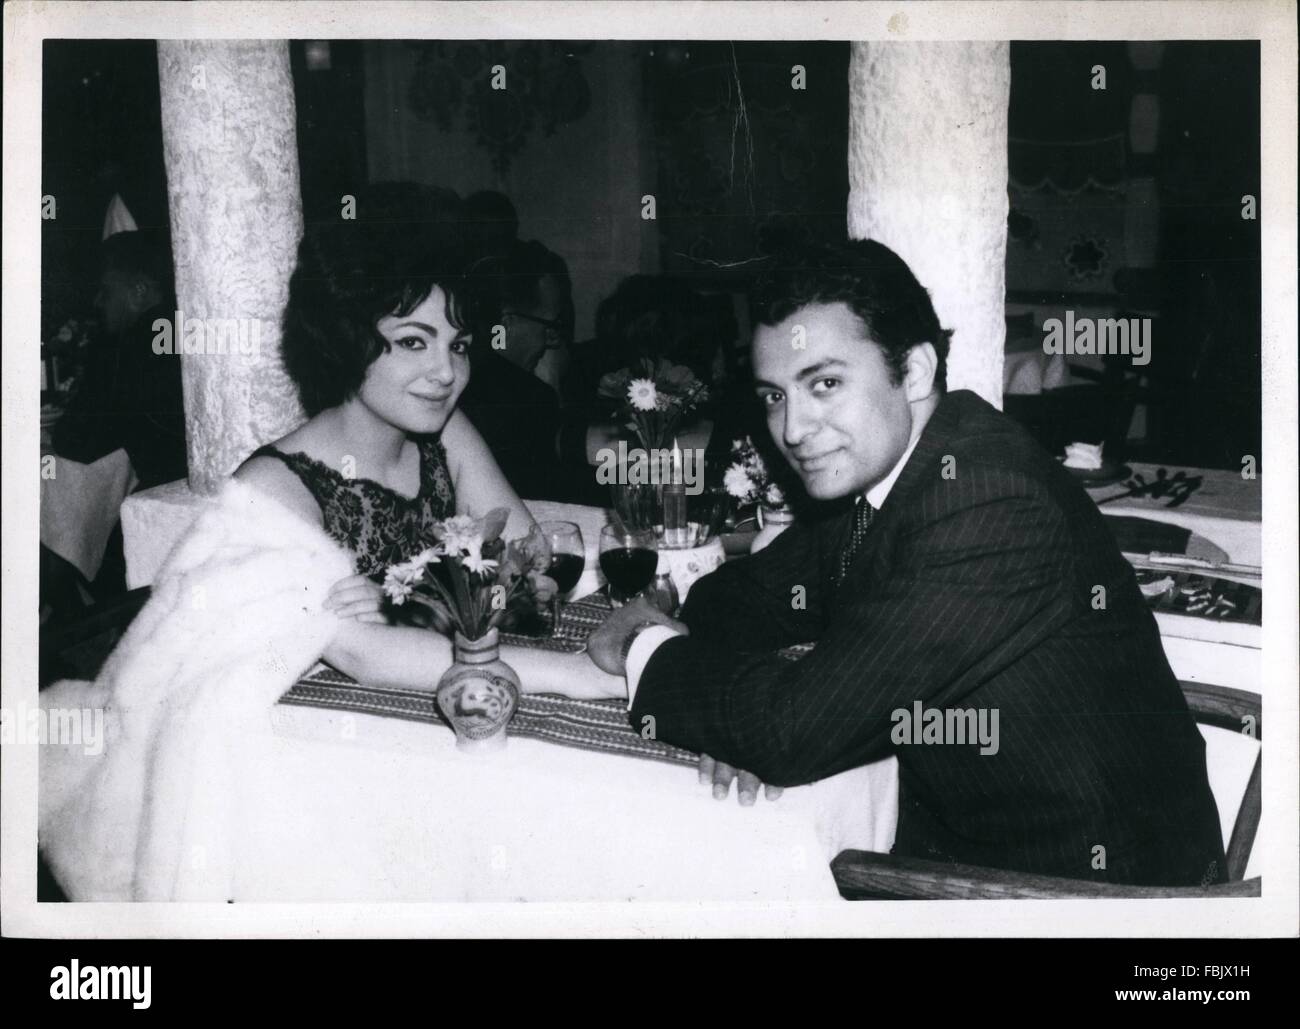 1962 - Metropolitan Opera star Teresa Stratas and her fiance the brilliant Indian conductor Zubin Mehta who alternates between Montreal and Los Angeles symphonies - at the Hungarian restaurant ''Piroschka'' in Munich, Germany © Keystone Pictures USA/ZUMAPRESS.com/Alamy Live News Stock Photo